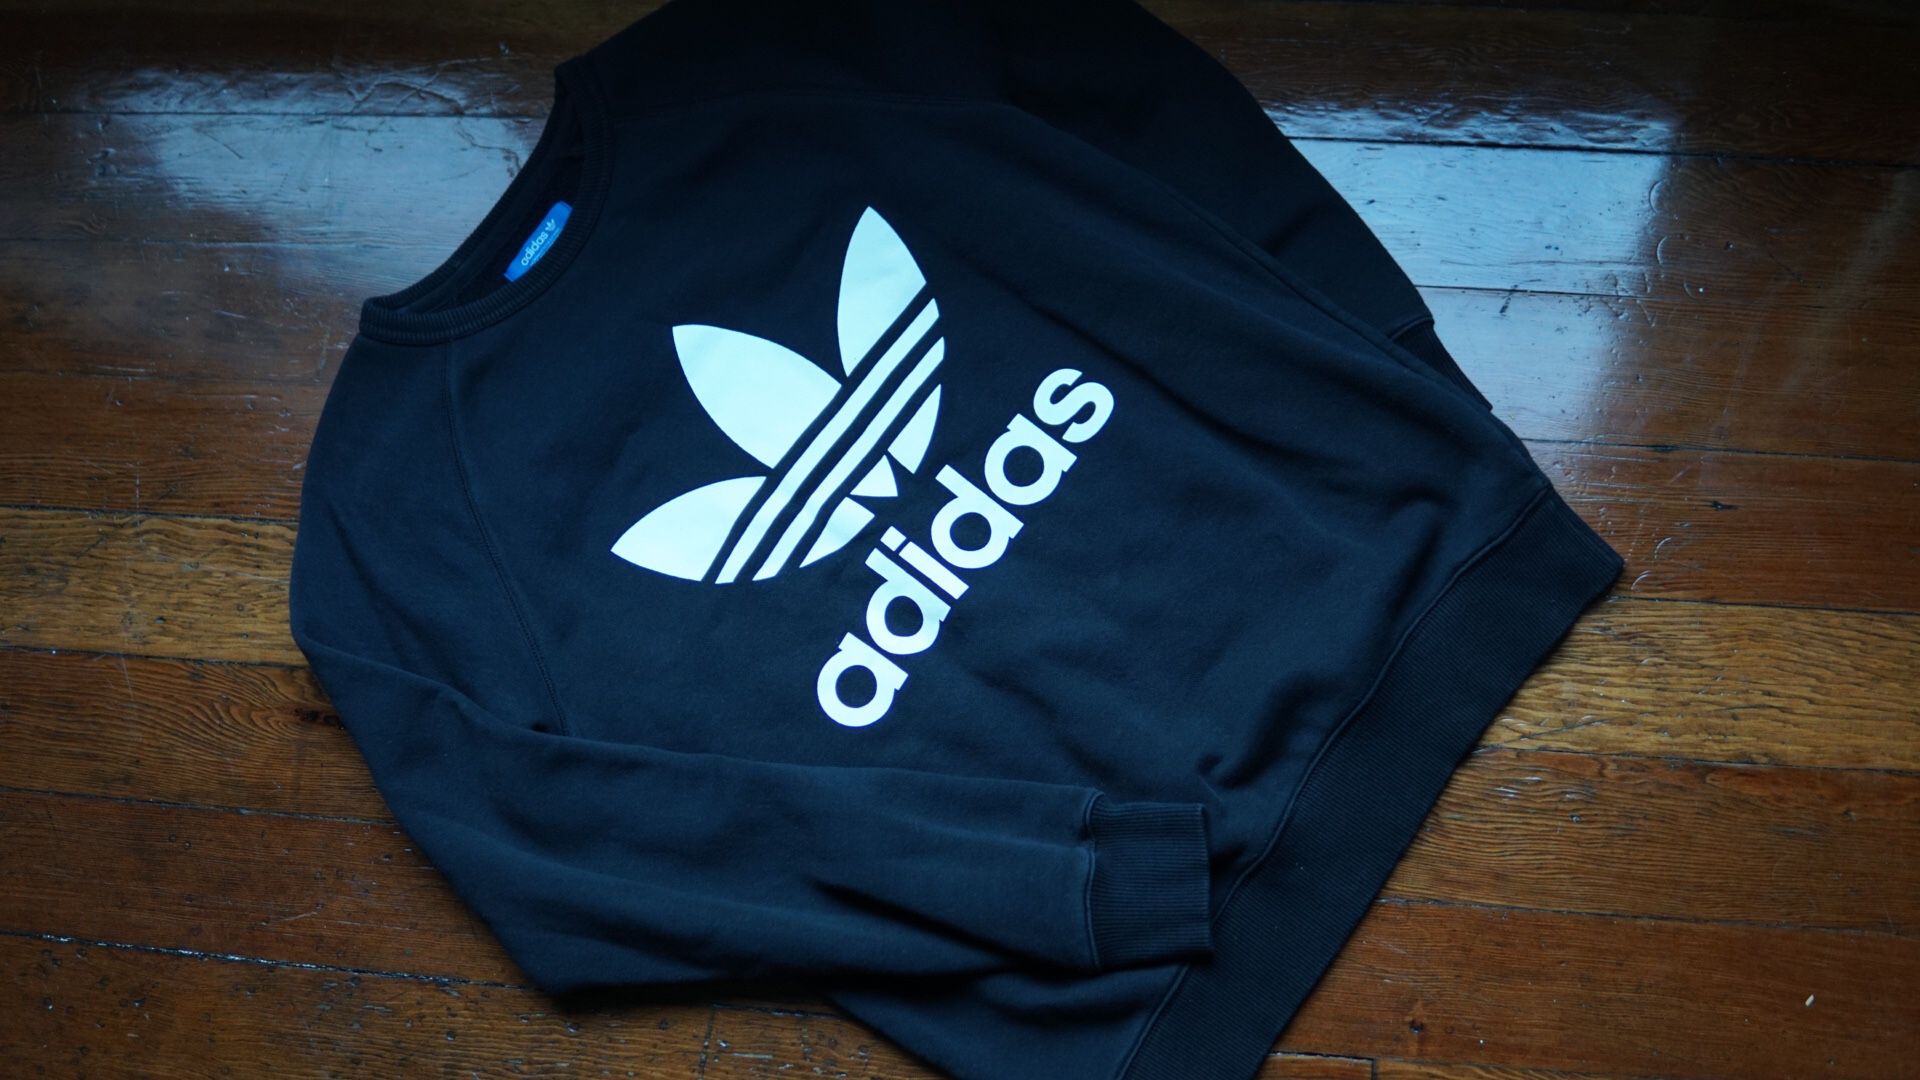 Black Adidas Originals Sweater Crewneck Size Small Pre-Owned, still in great condition!